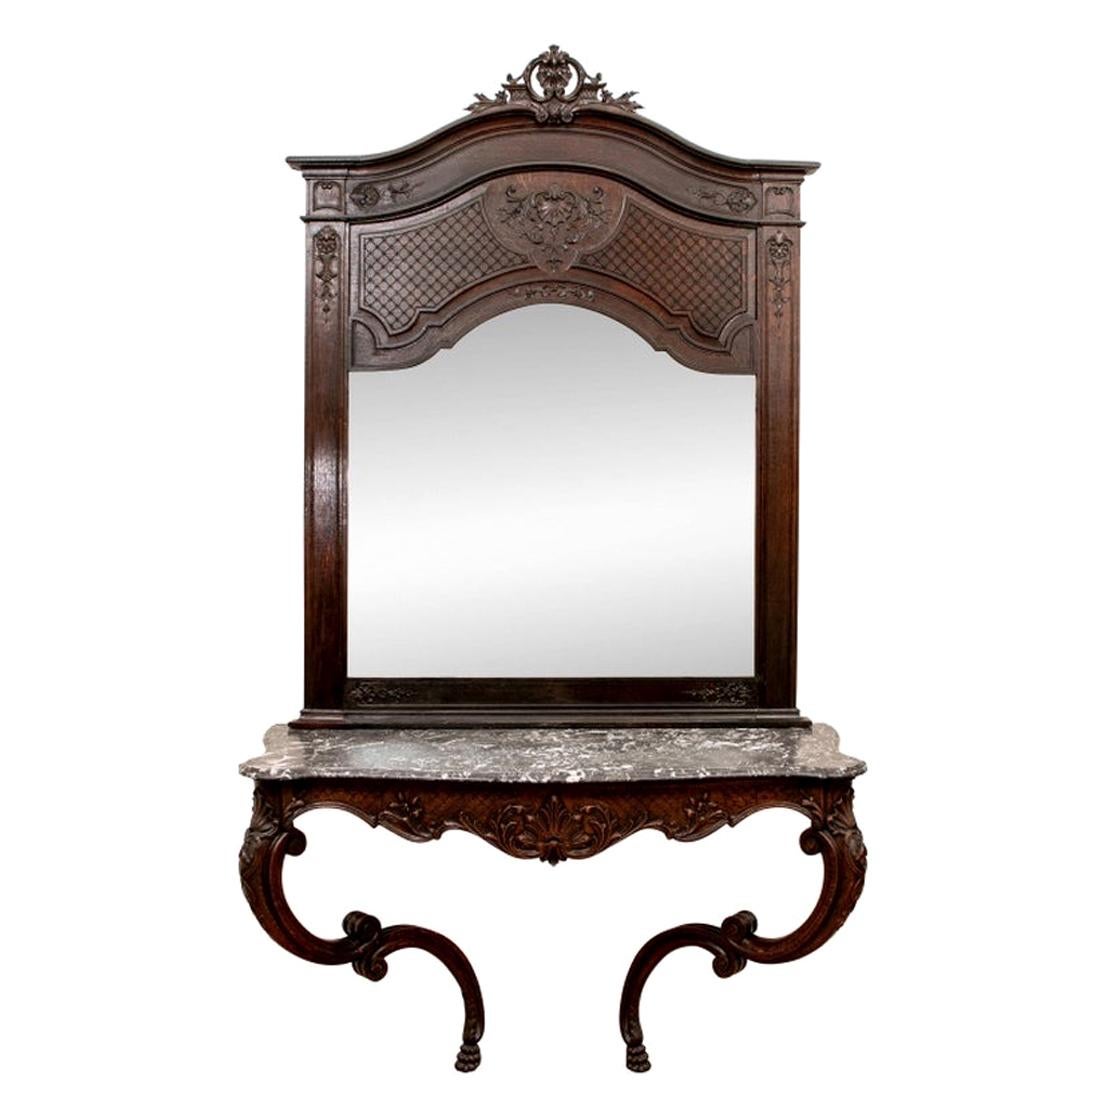 Massive and Elaborate Grand Entry Pier Mirror And Console